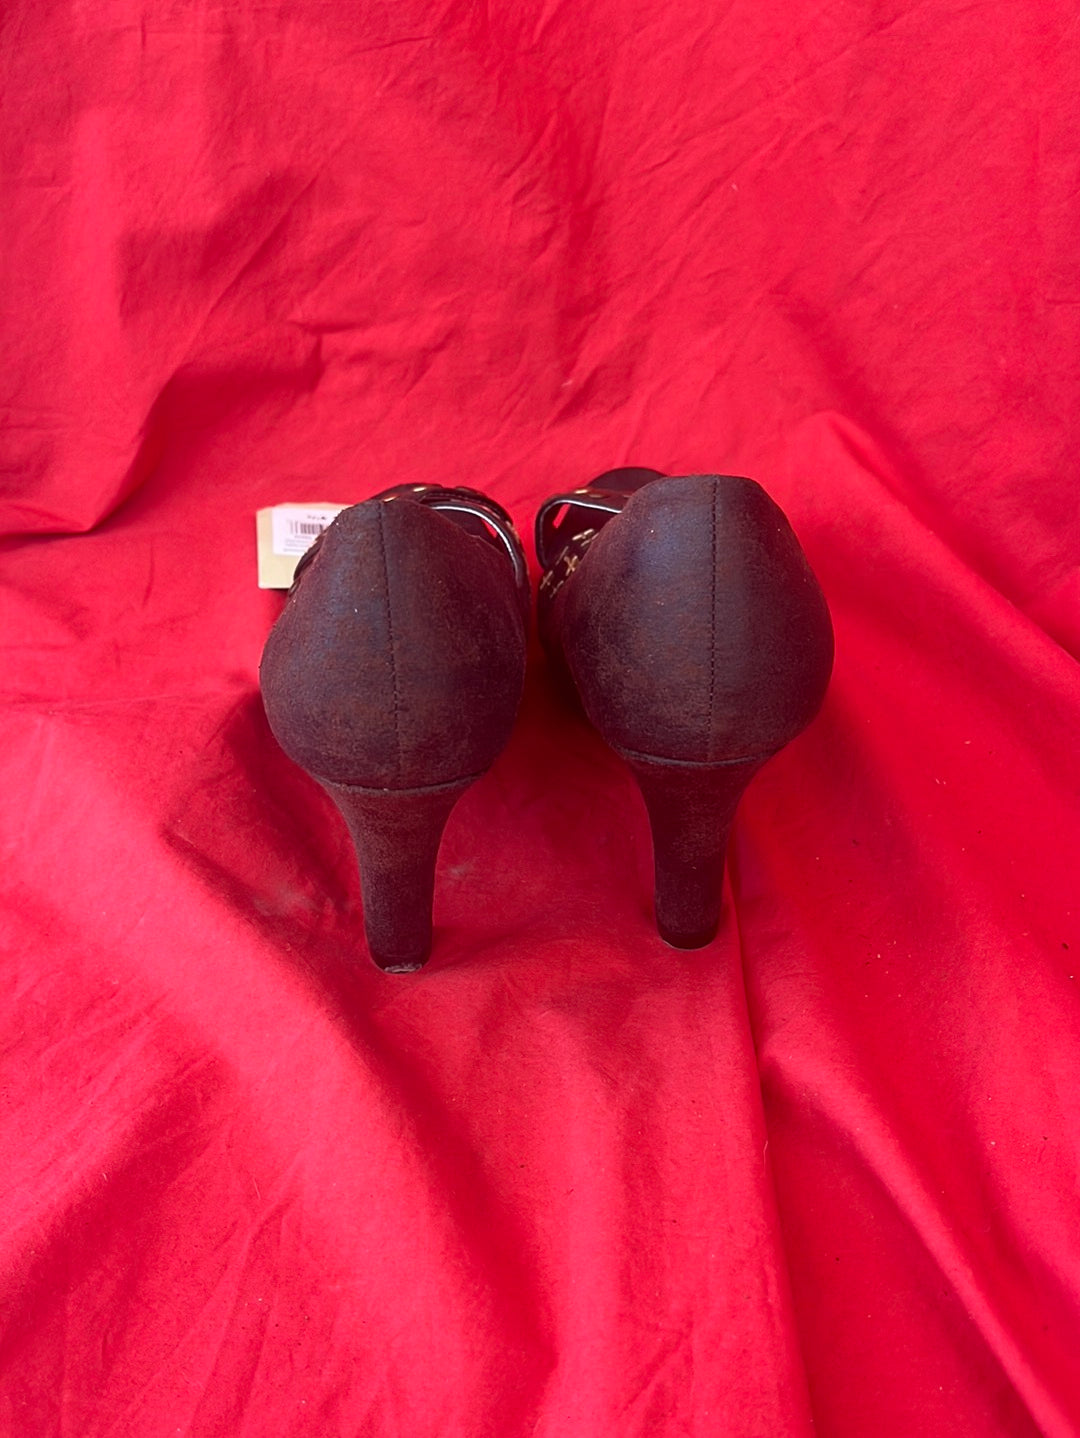 NWT -- L.E.I. Brown Leather Open-Toed Heels -- Size 9.5 US